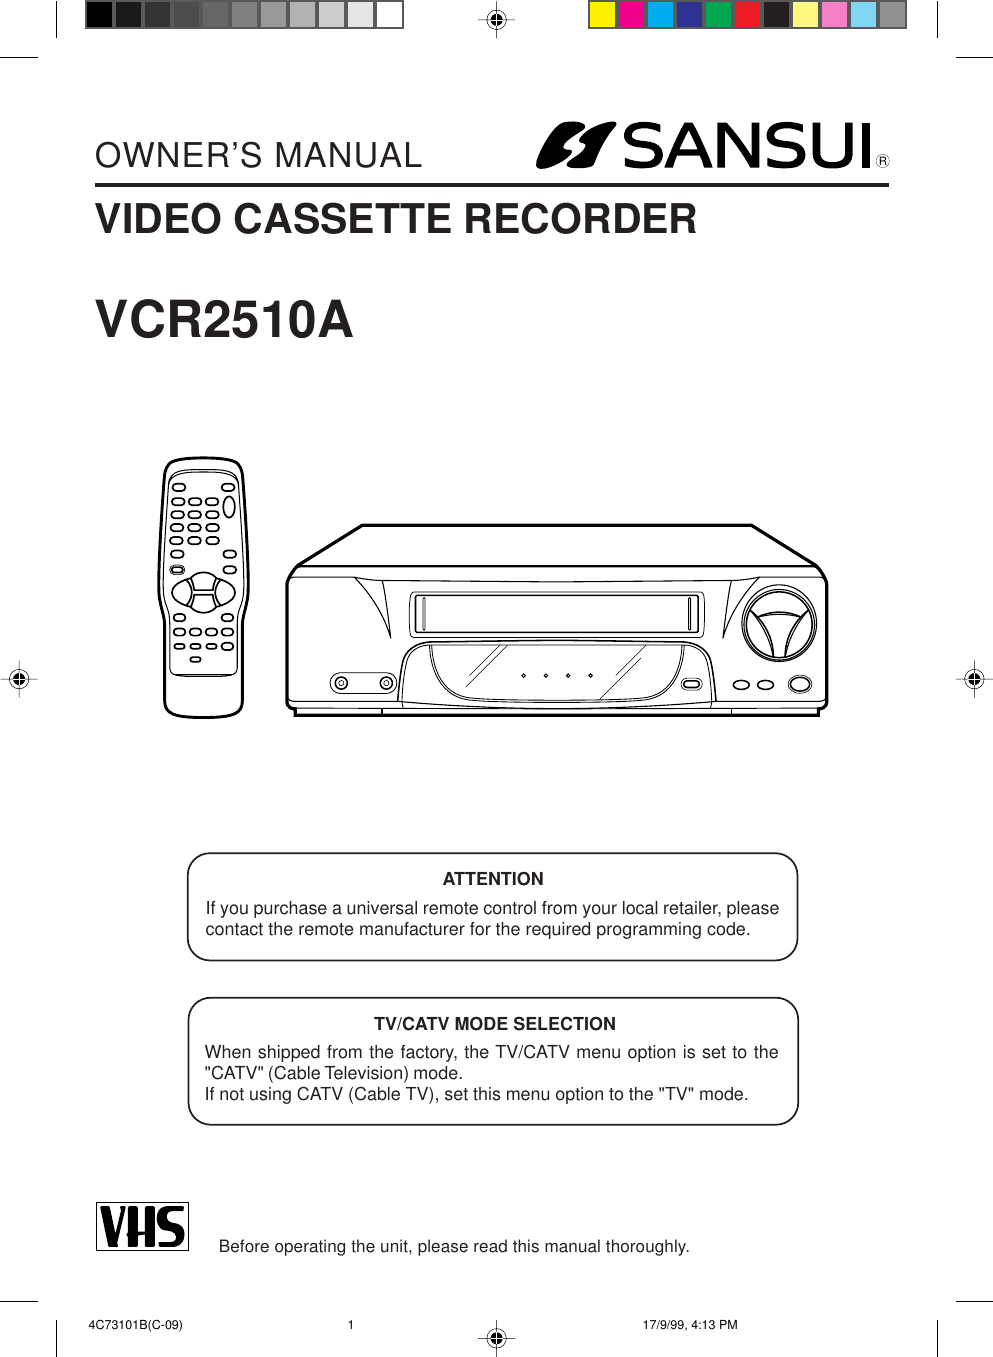 RVIDEO CASSETTE RECORDEROWNER’S MANUALBefore operating the unit, please read this manual thoroughly.TV/CATV MODE SELECTIONWhen shipped from the factory, the TV/CATV menu option is set to the&quot;CATV&quot; (Cable Television) mode.If not using CATV (Cable TV), set this menu option to the &quot;TV&quot; mode.ATTENTIONIf you purchase a universal remote control from your local retailer, pleasecontact the remote manufacturer for the required programming code.VCR2510A 4C73101B(C-09) 17/9/99, 4:13 PM1